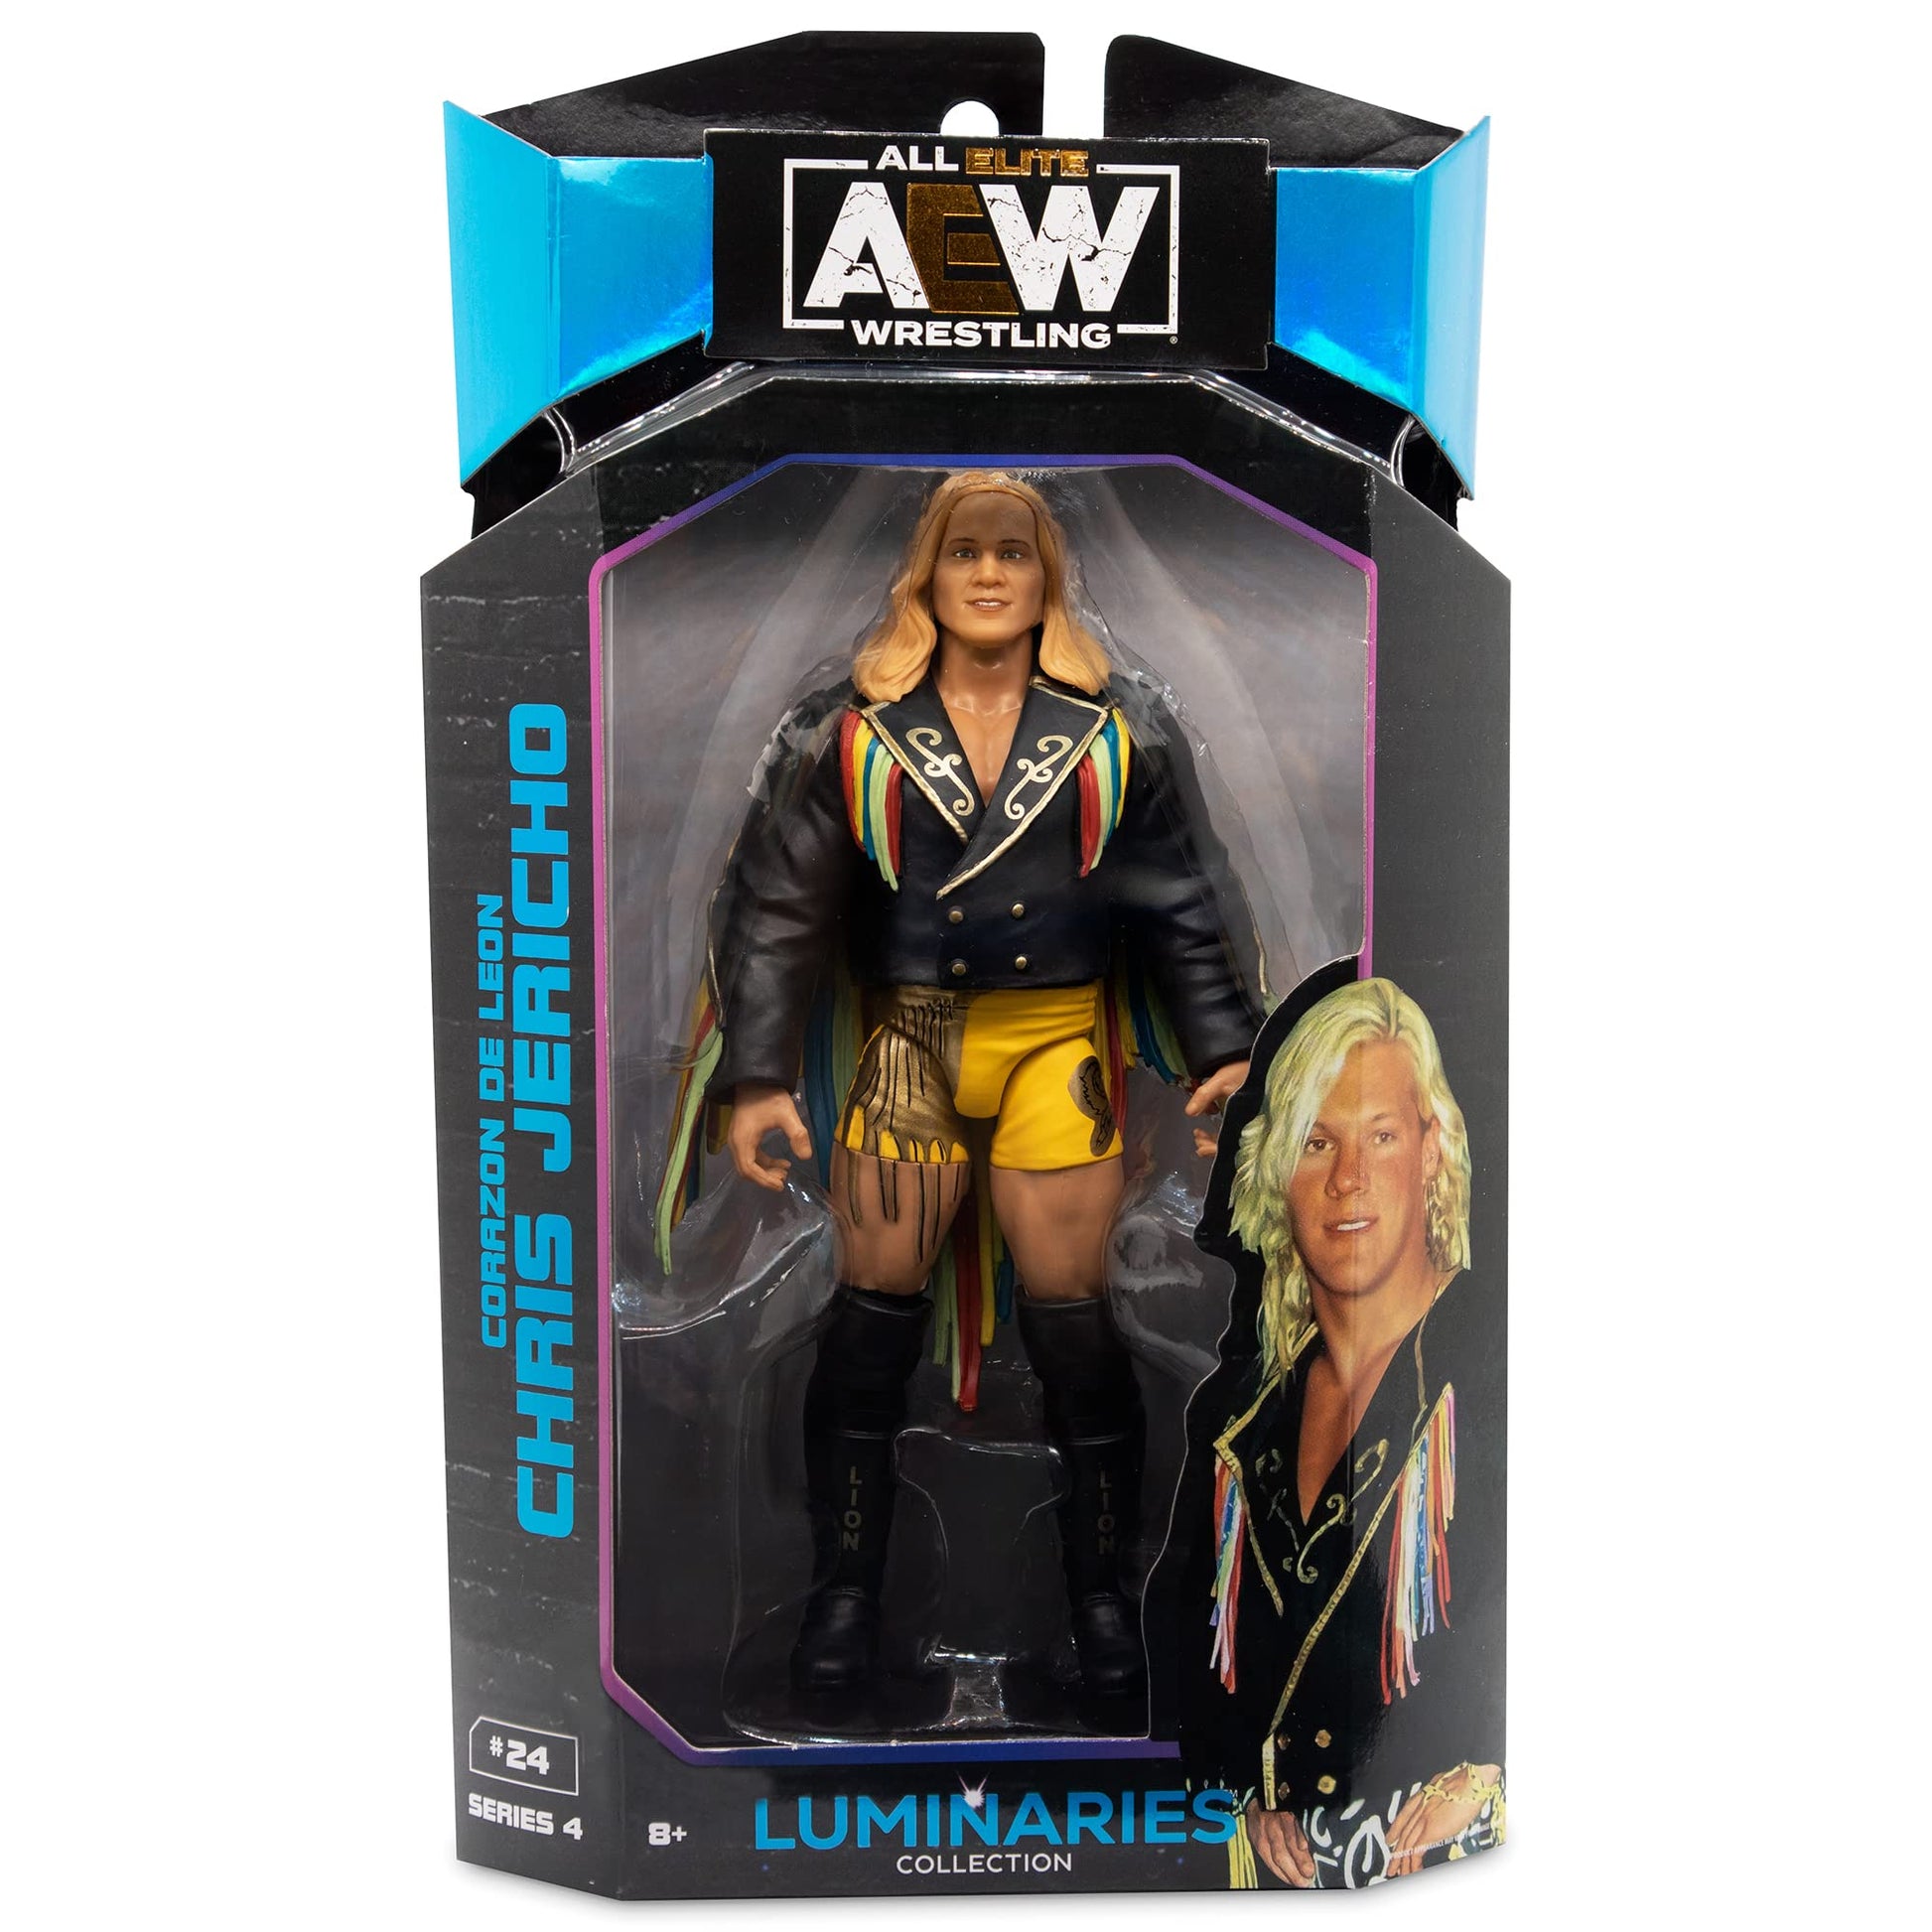 Ringside Chris Jericho - AEW Unmatched Series 4 Toy Wrestling Figure - Zippigames